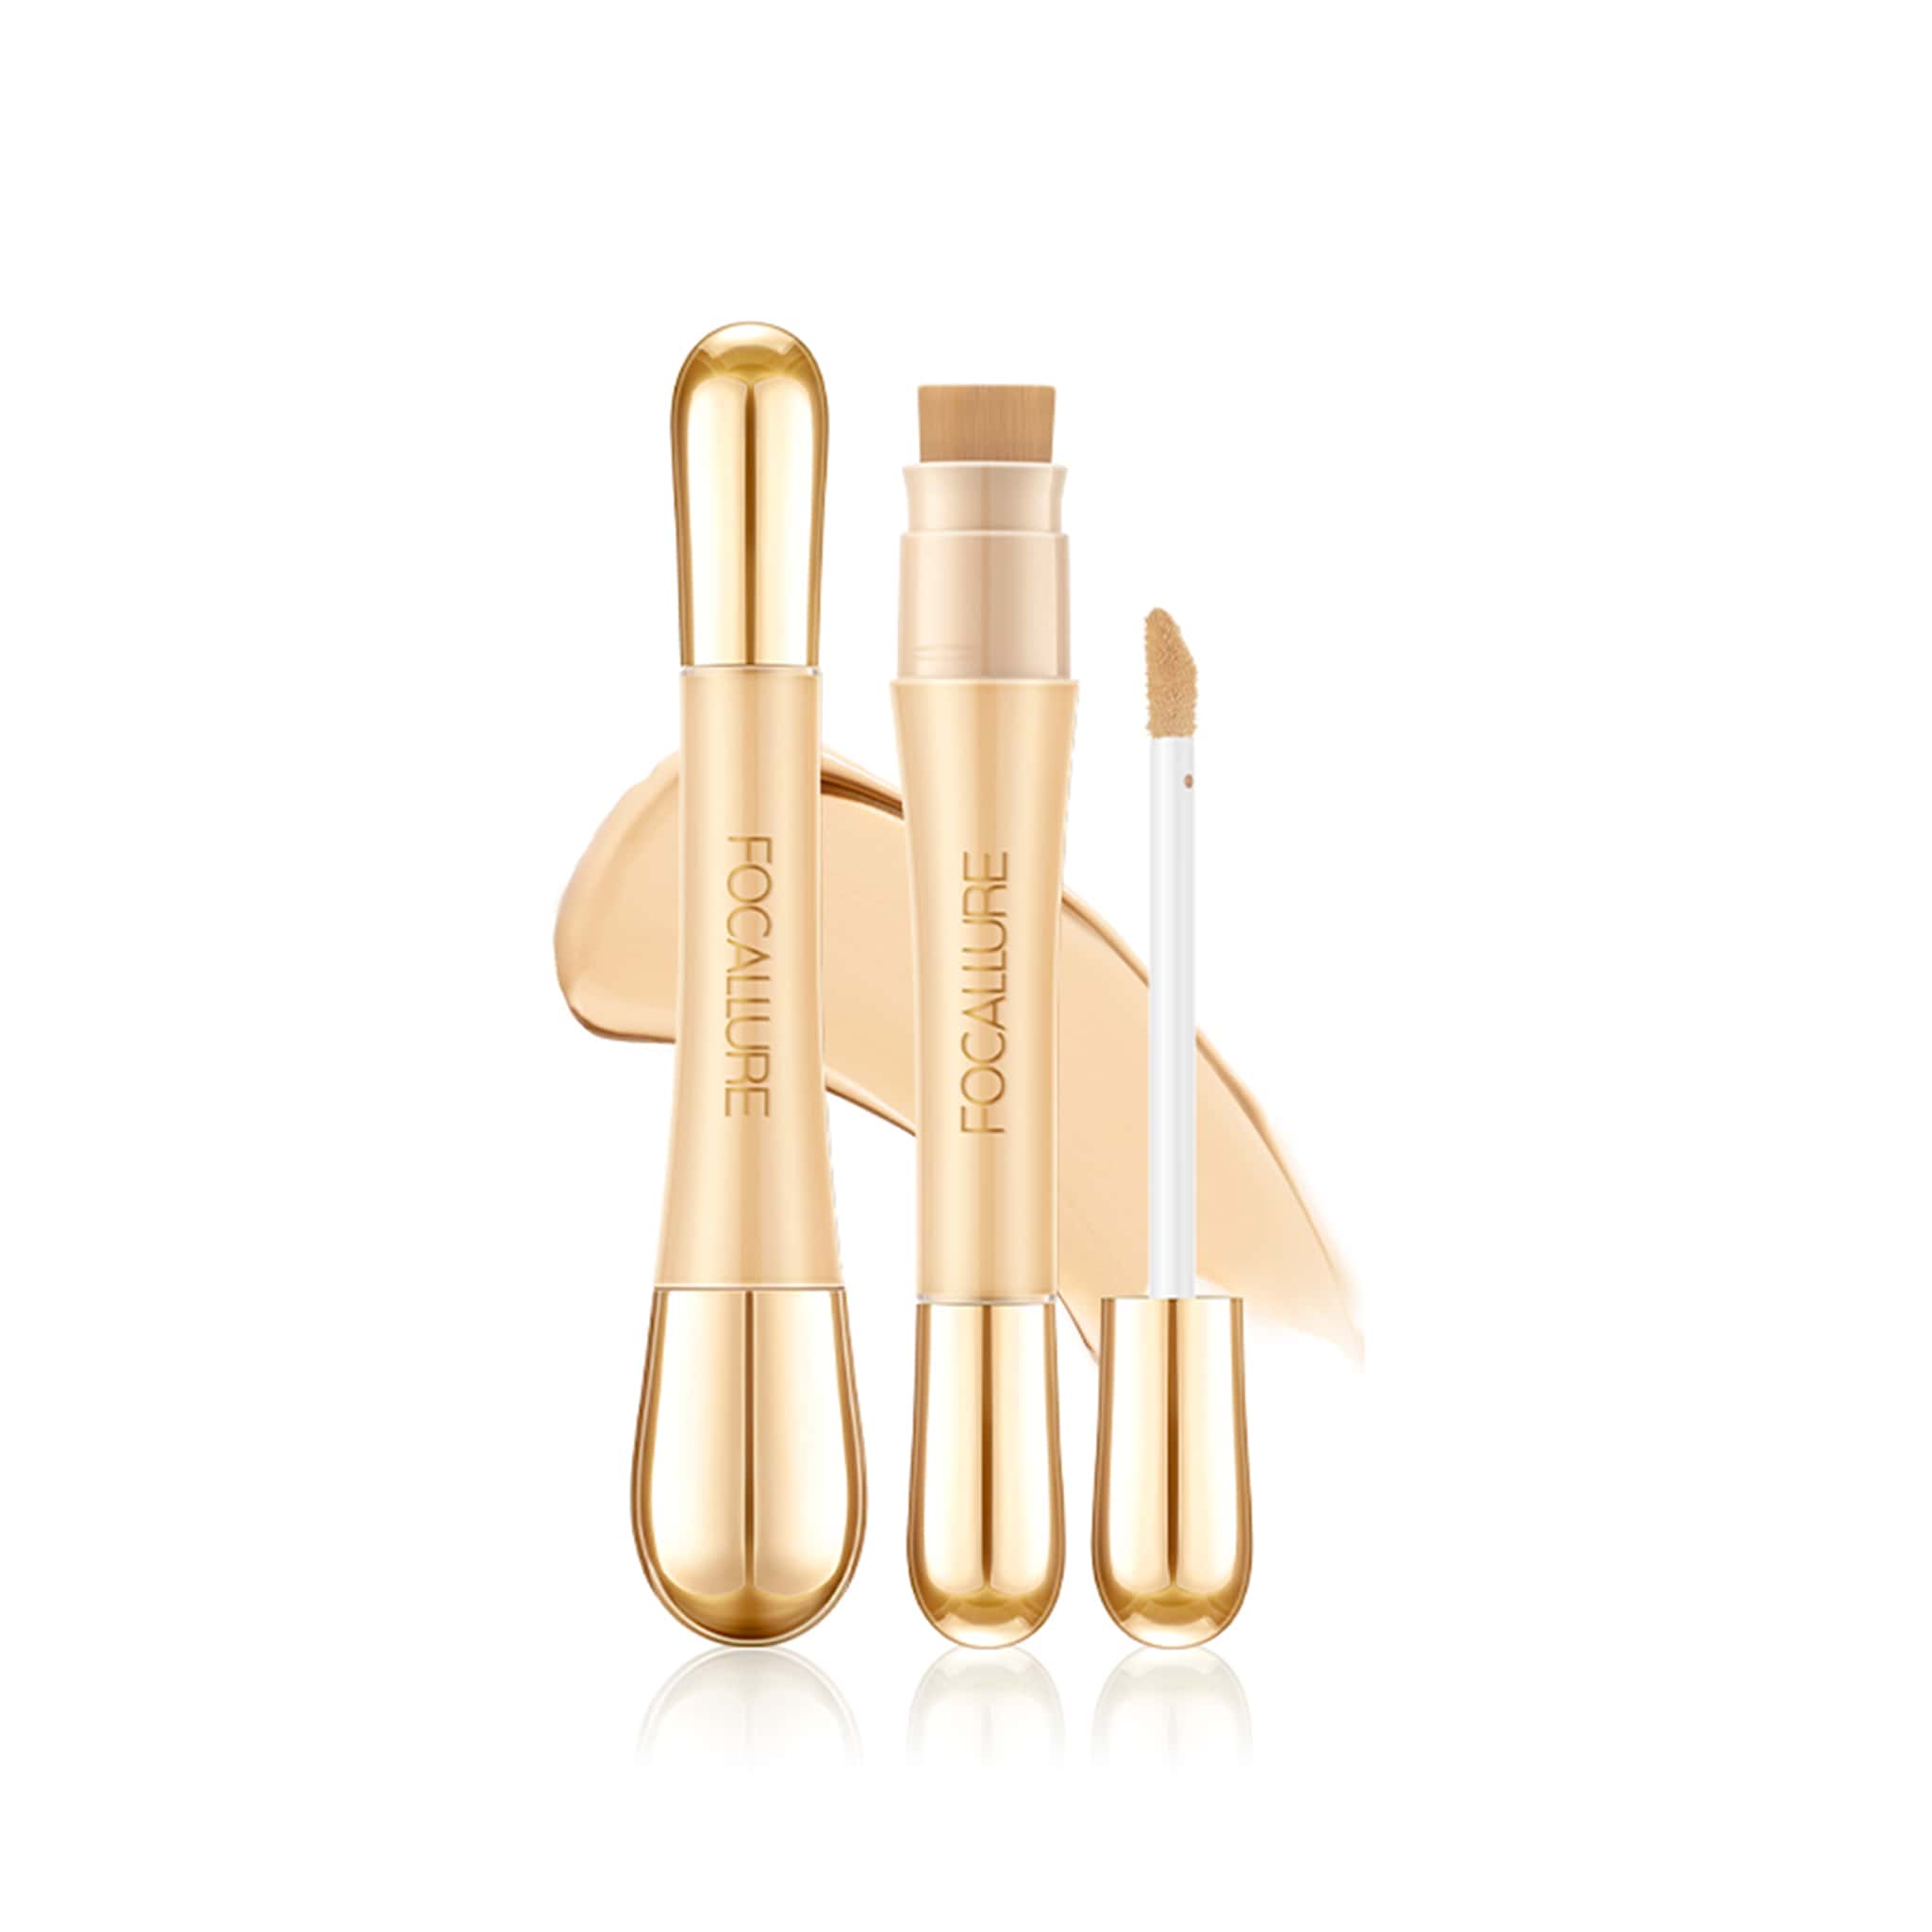 Matte Complete Concealer High Coverage with Brush